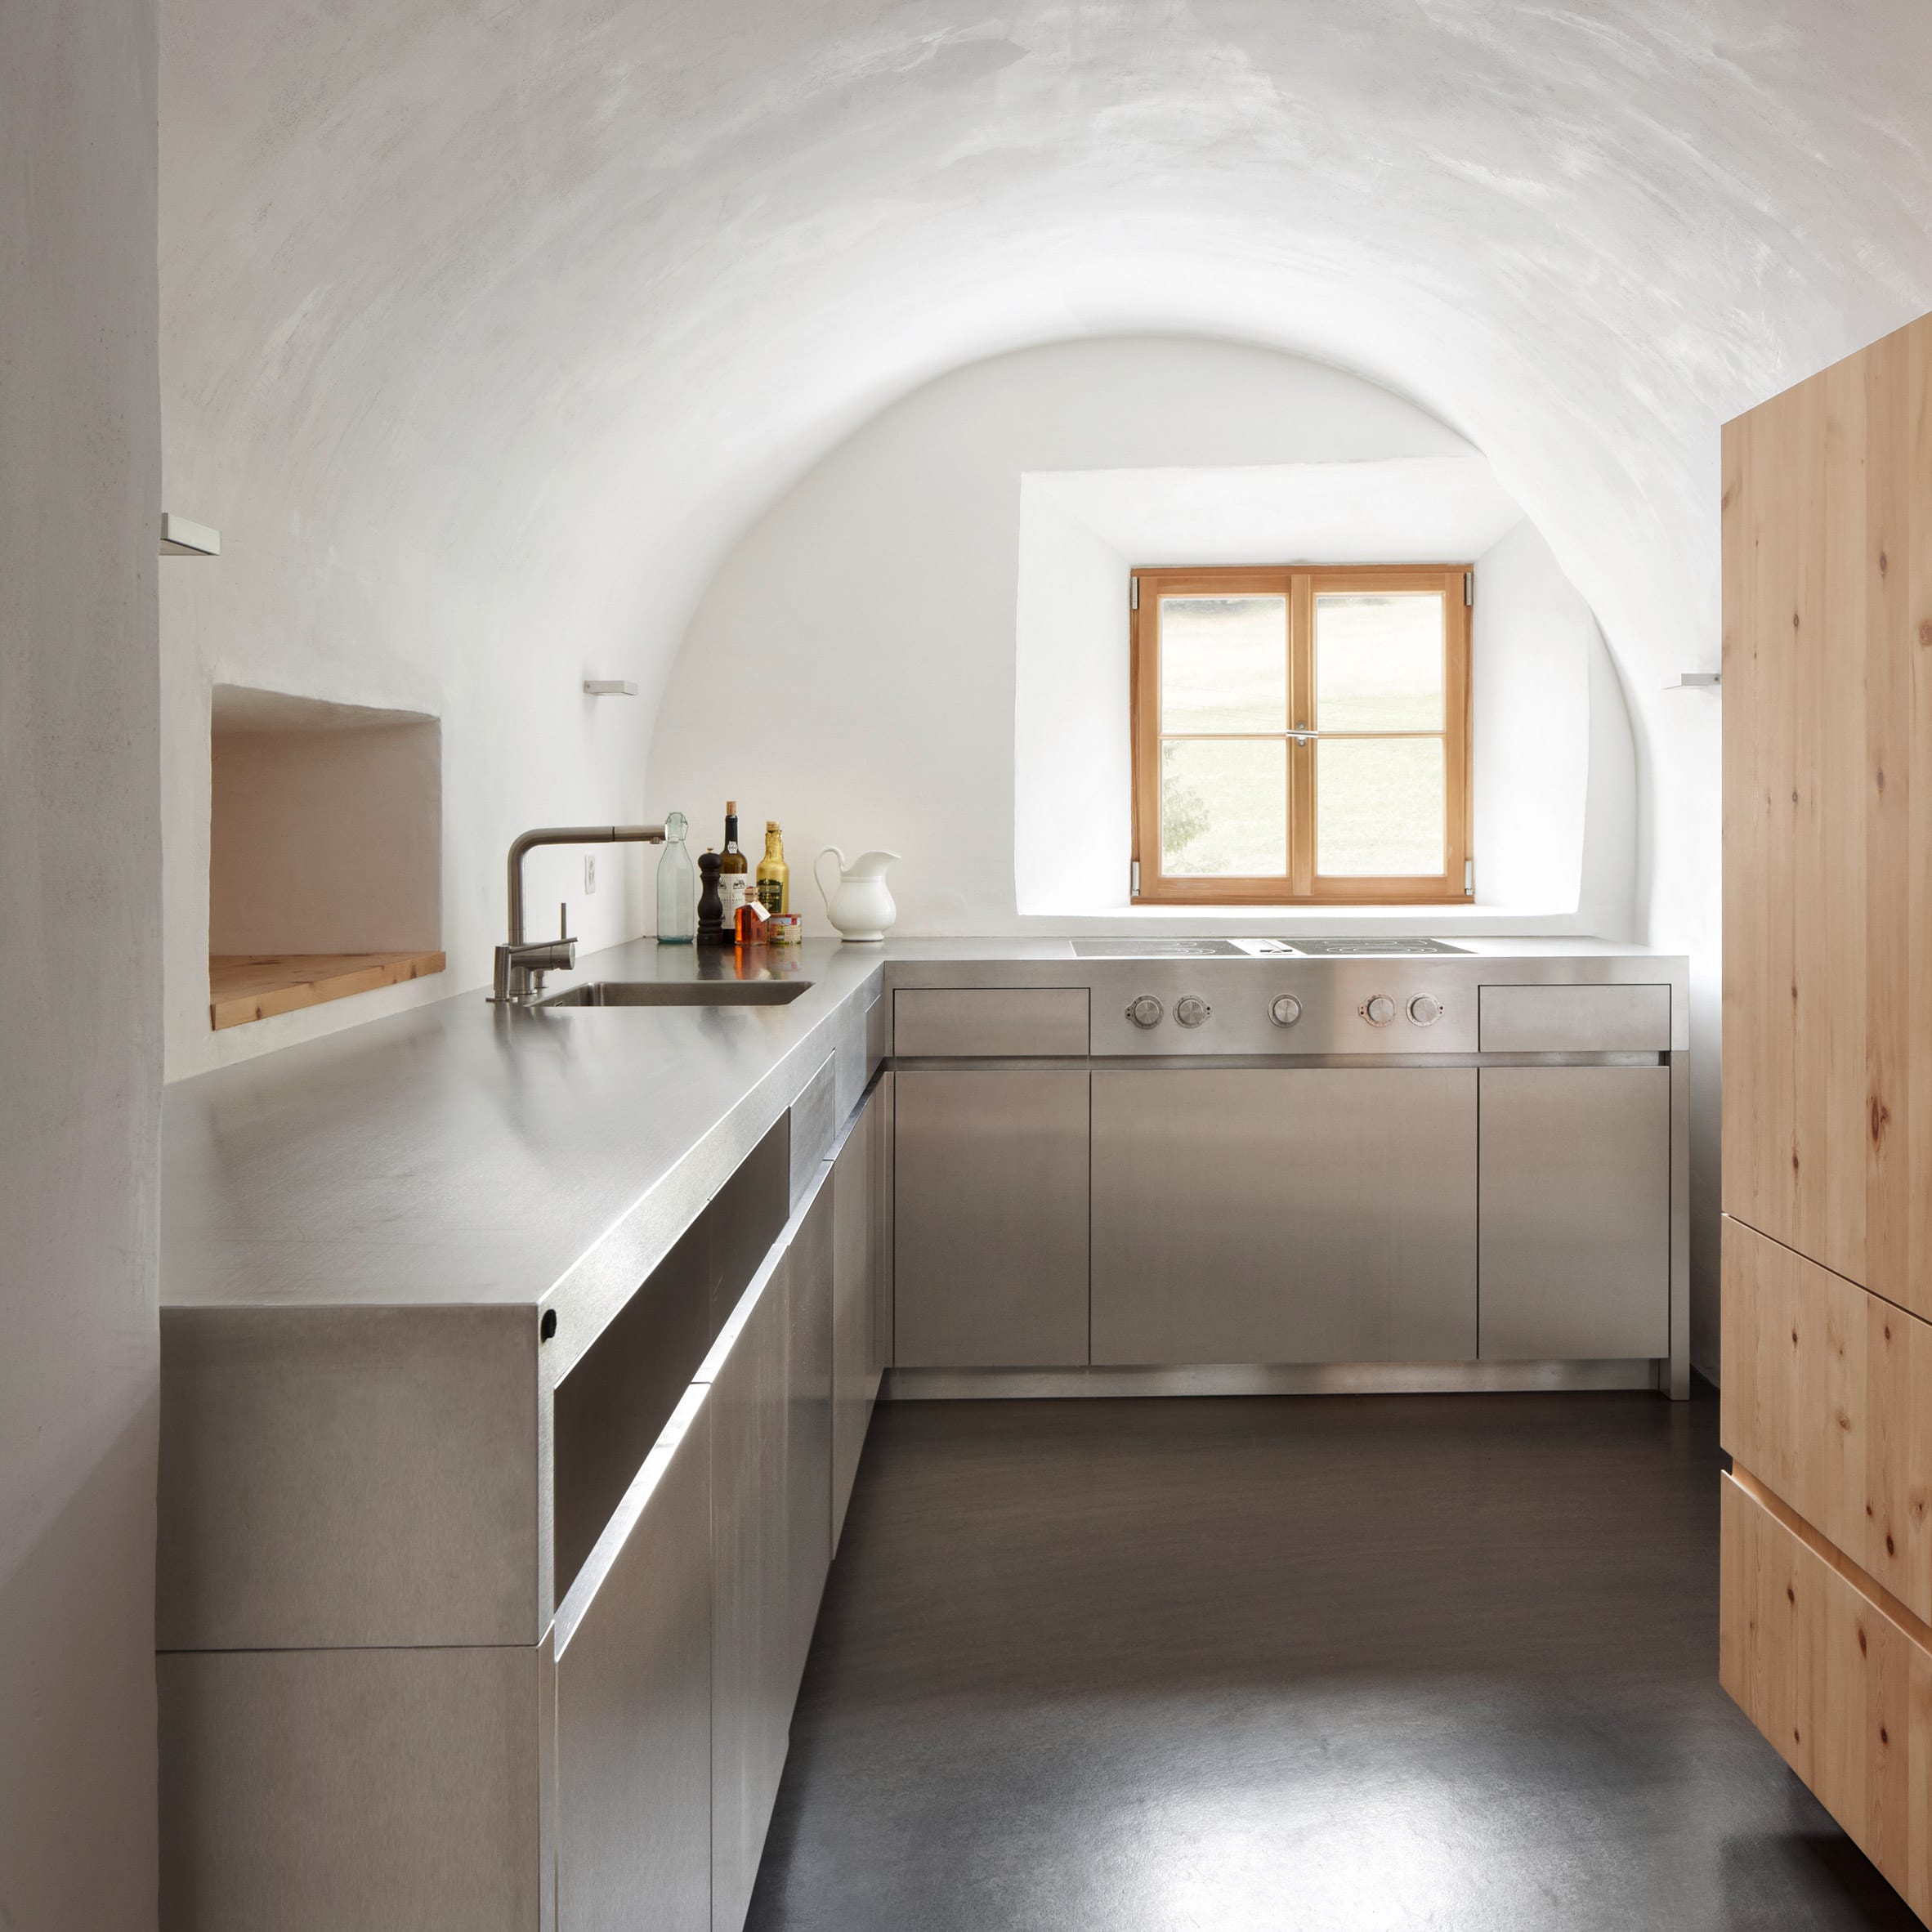 Ten L-shaped kitchens with extensive countertop space